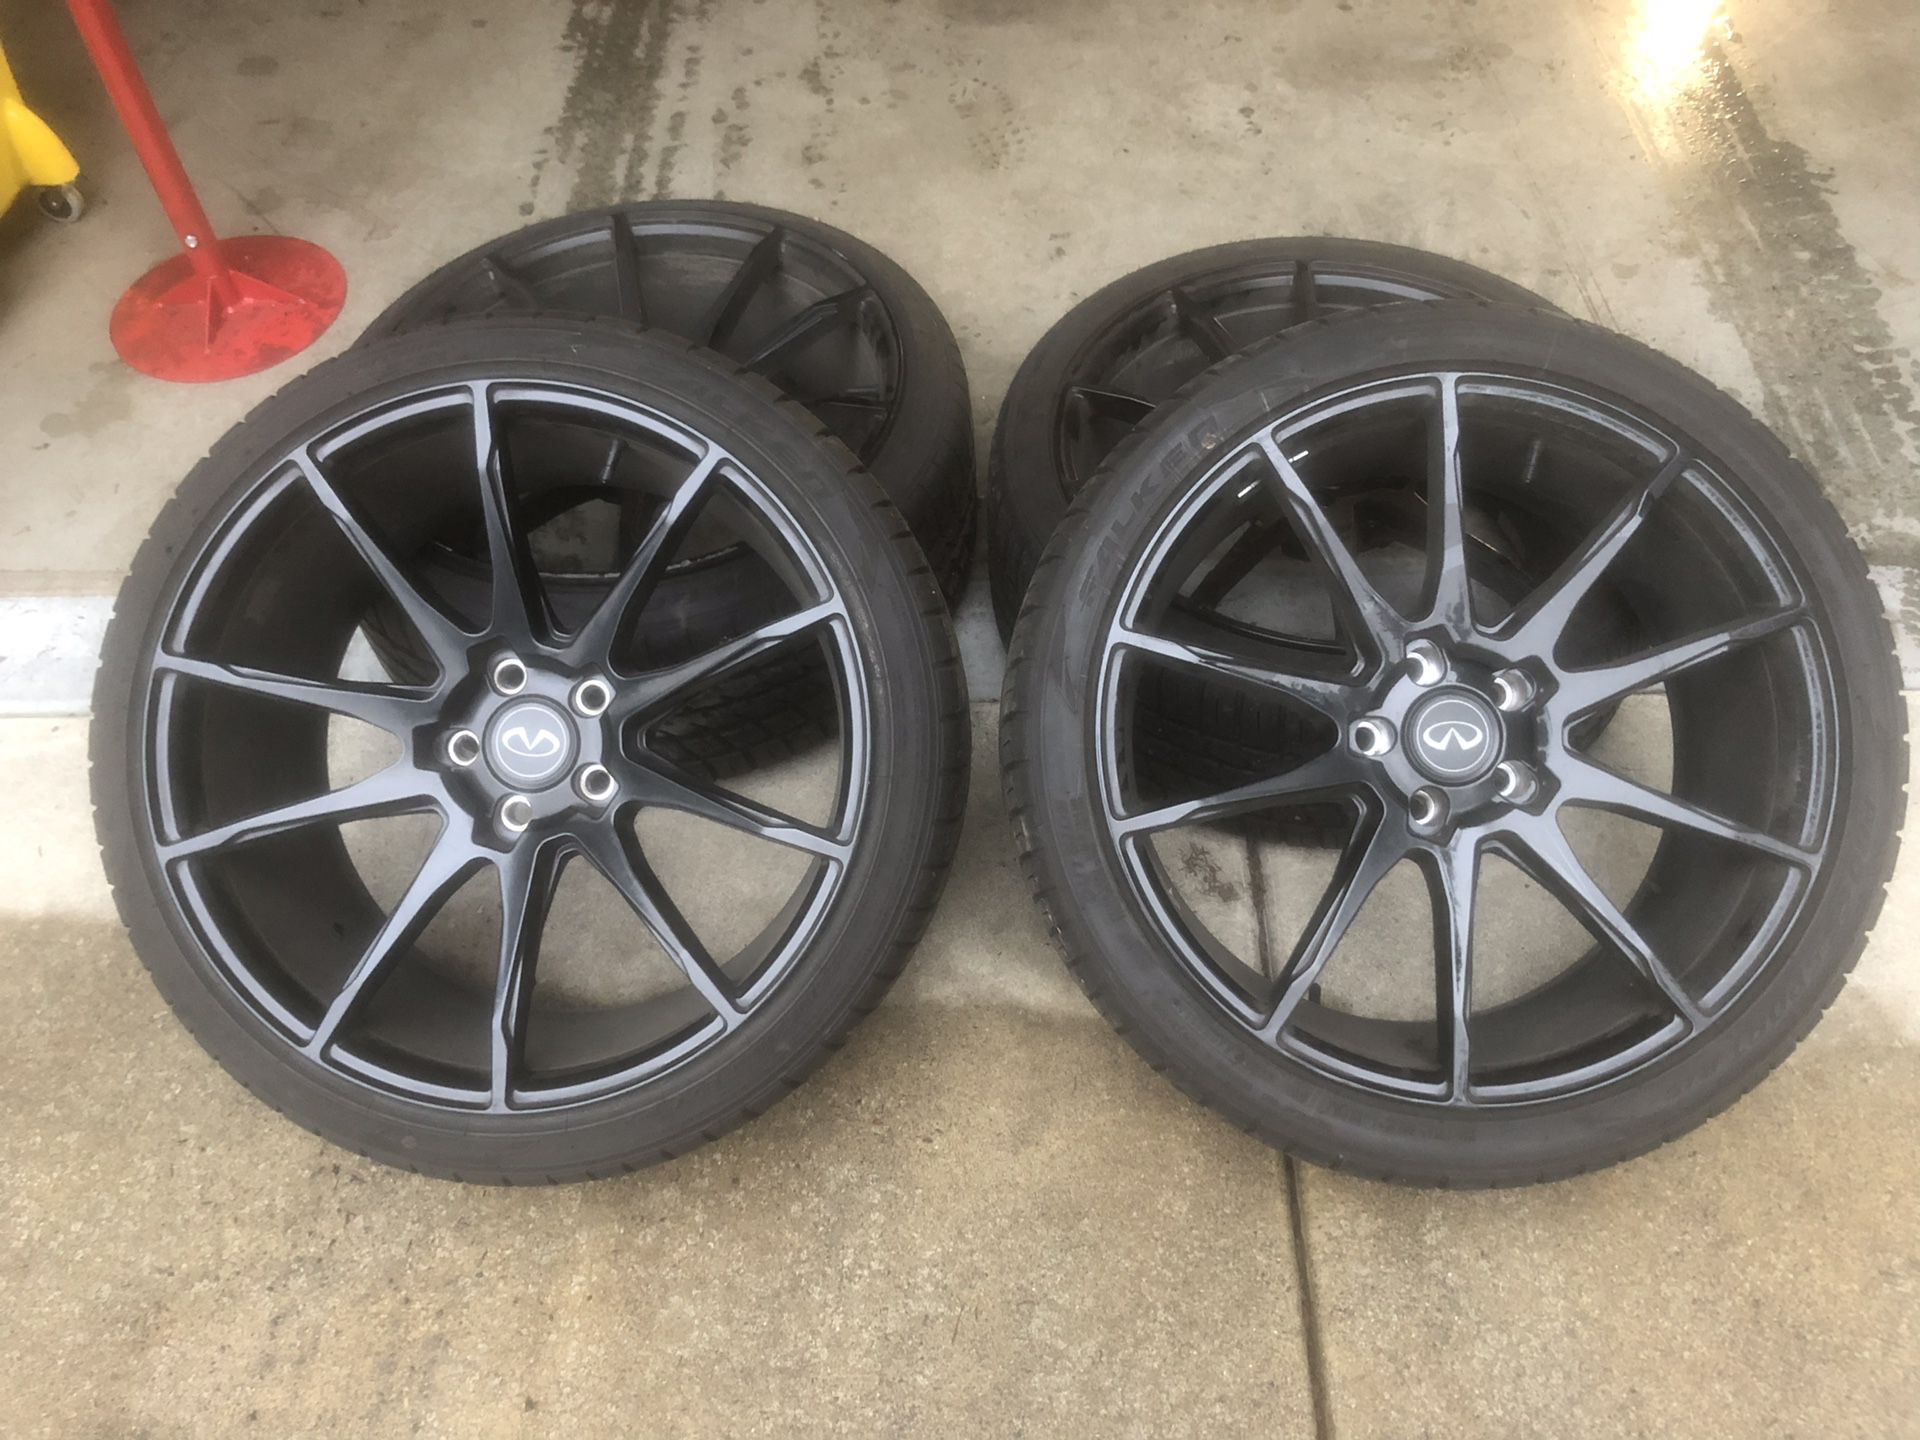 20” rims and tires